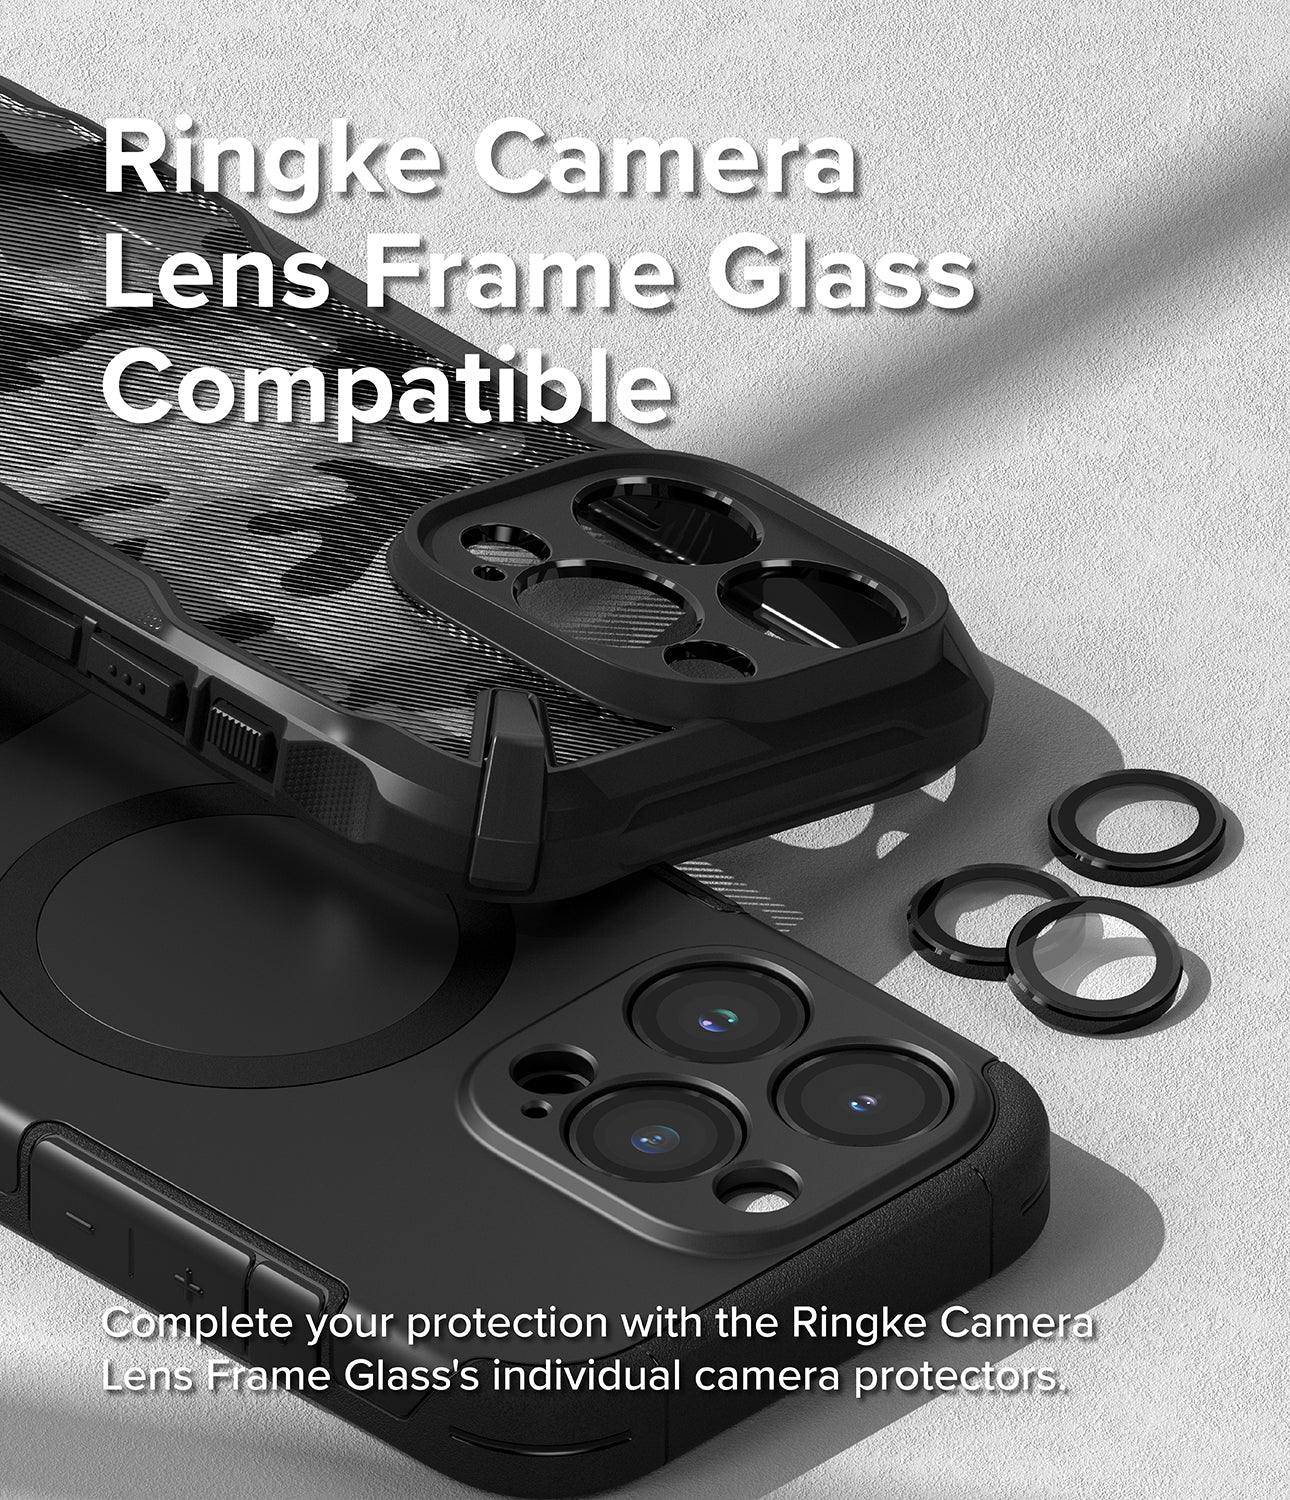 iPhone 15 Pro Max Case | Alles - Gun Metal - Ringke Camera Lens Frame Glass Compatible. Complete your protection with the Ringke Camera Lens Frame Glass' individual camera protectors.